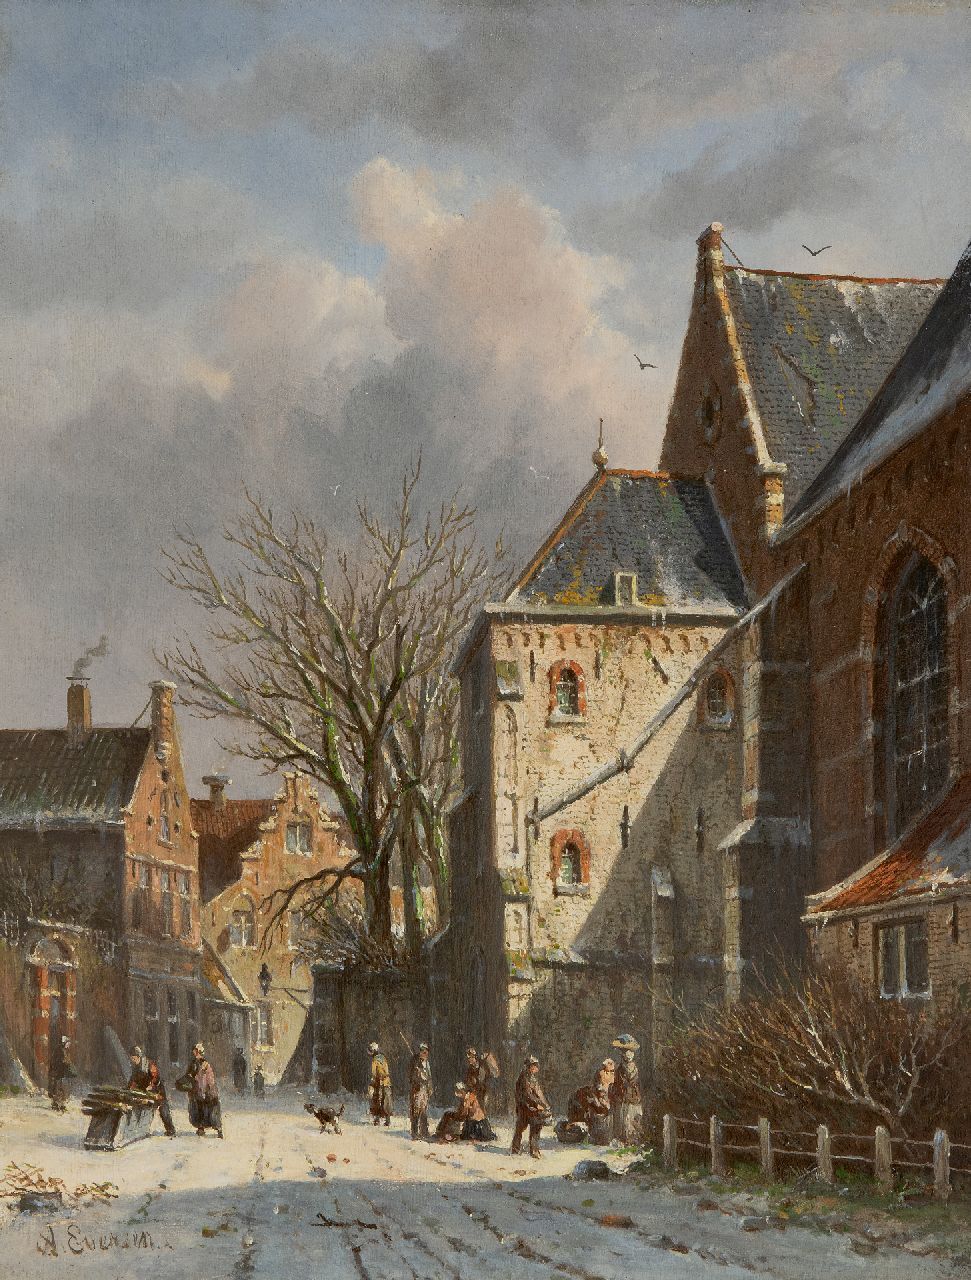 Eversen A.  | Adrianus Eversen | Paintings offered for sale | Snowy townscape with figures, oil on panel 35.7 x 27.6 cm, signed l.l.